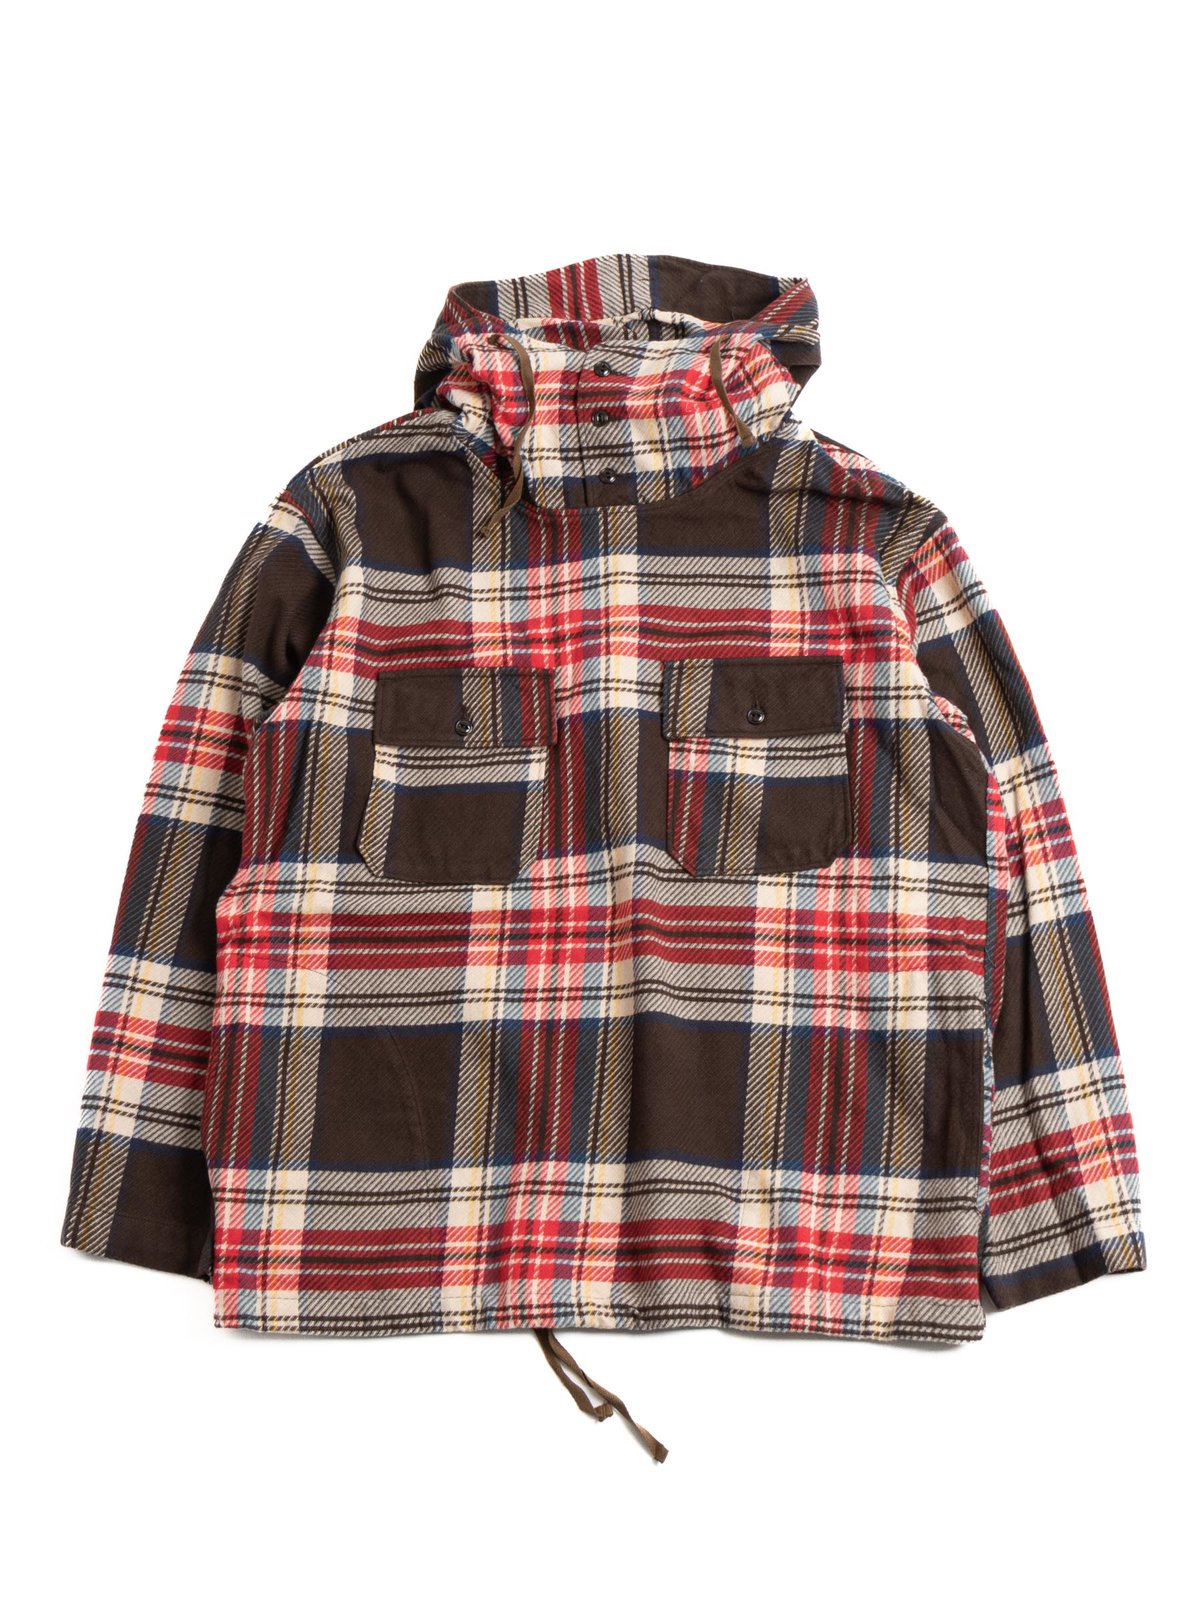 CAGOULE SHIRT BROWN COTTON HEAVY TWILL PLAID by Engineered